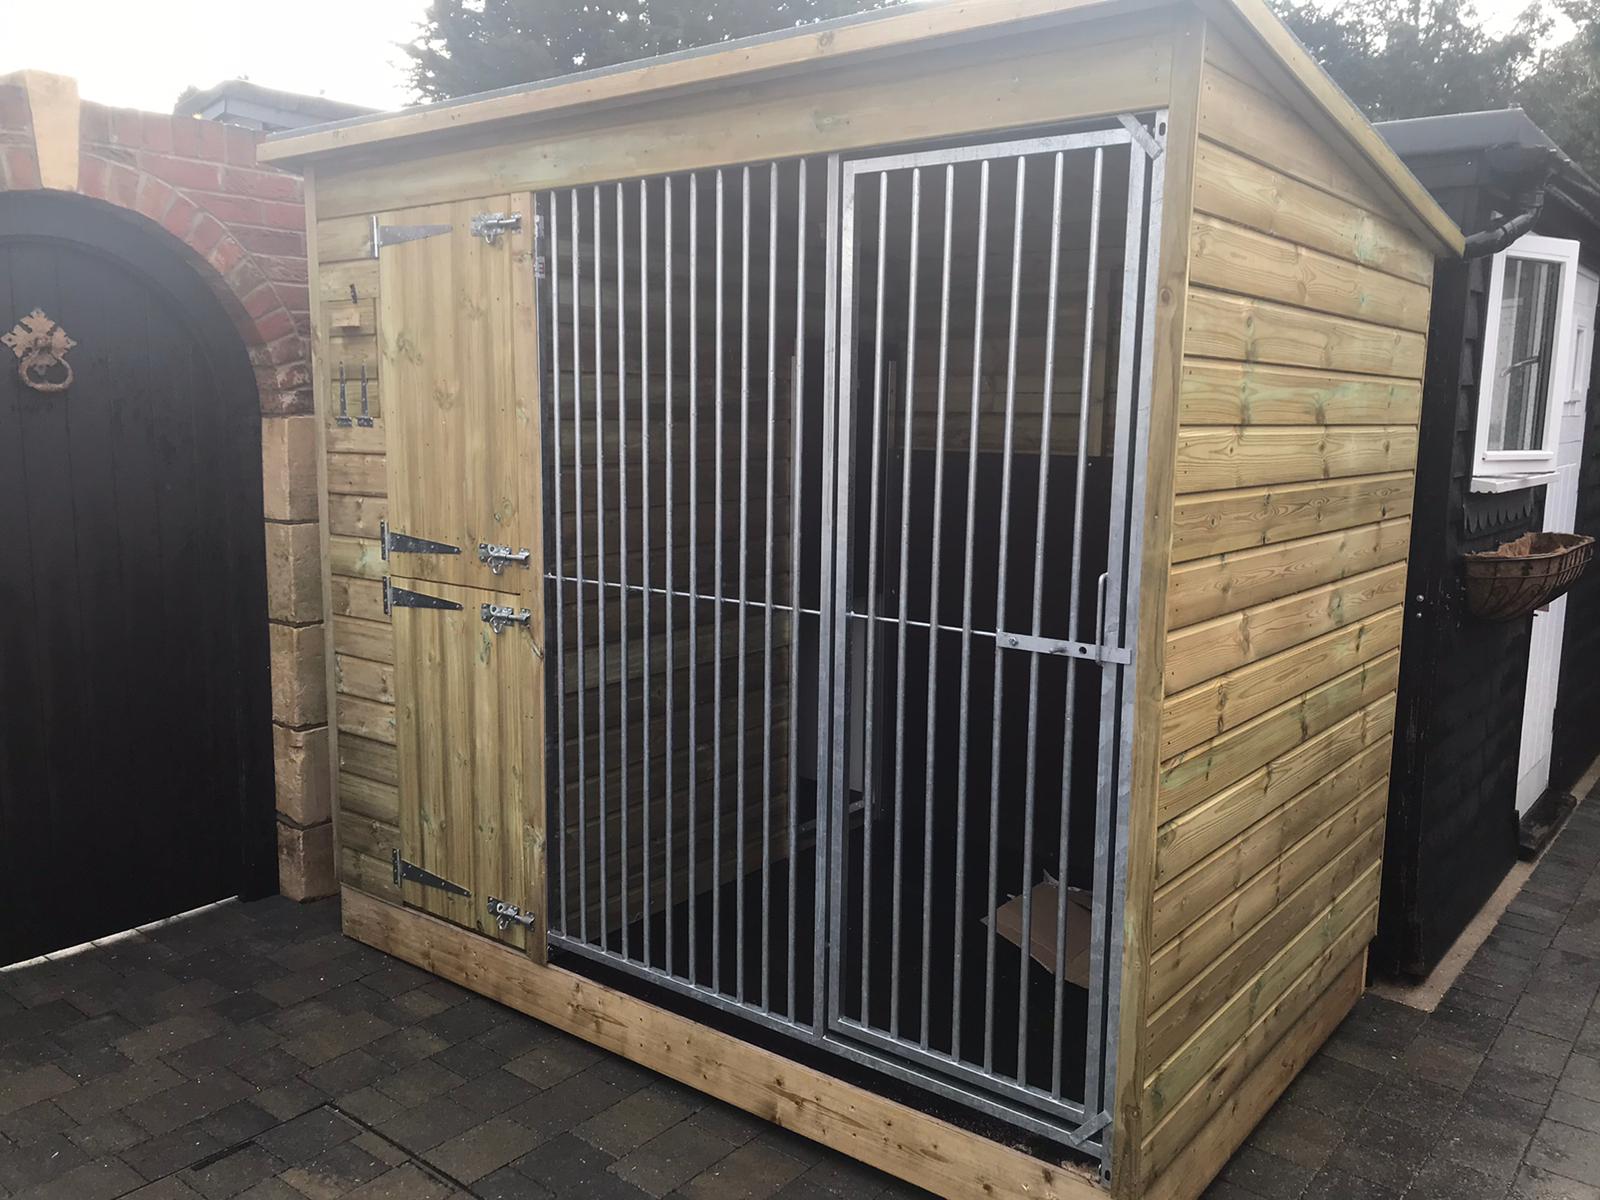 Stapeley Wooden Dog Kennel And Run 12ft (wide) x 4ft (deep) x 6'6ft (high)